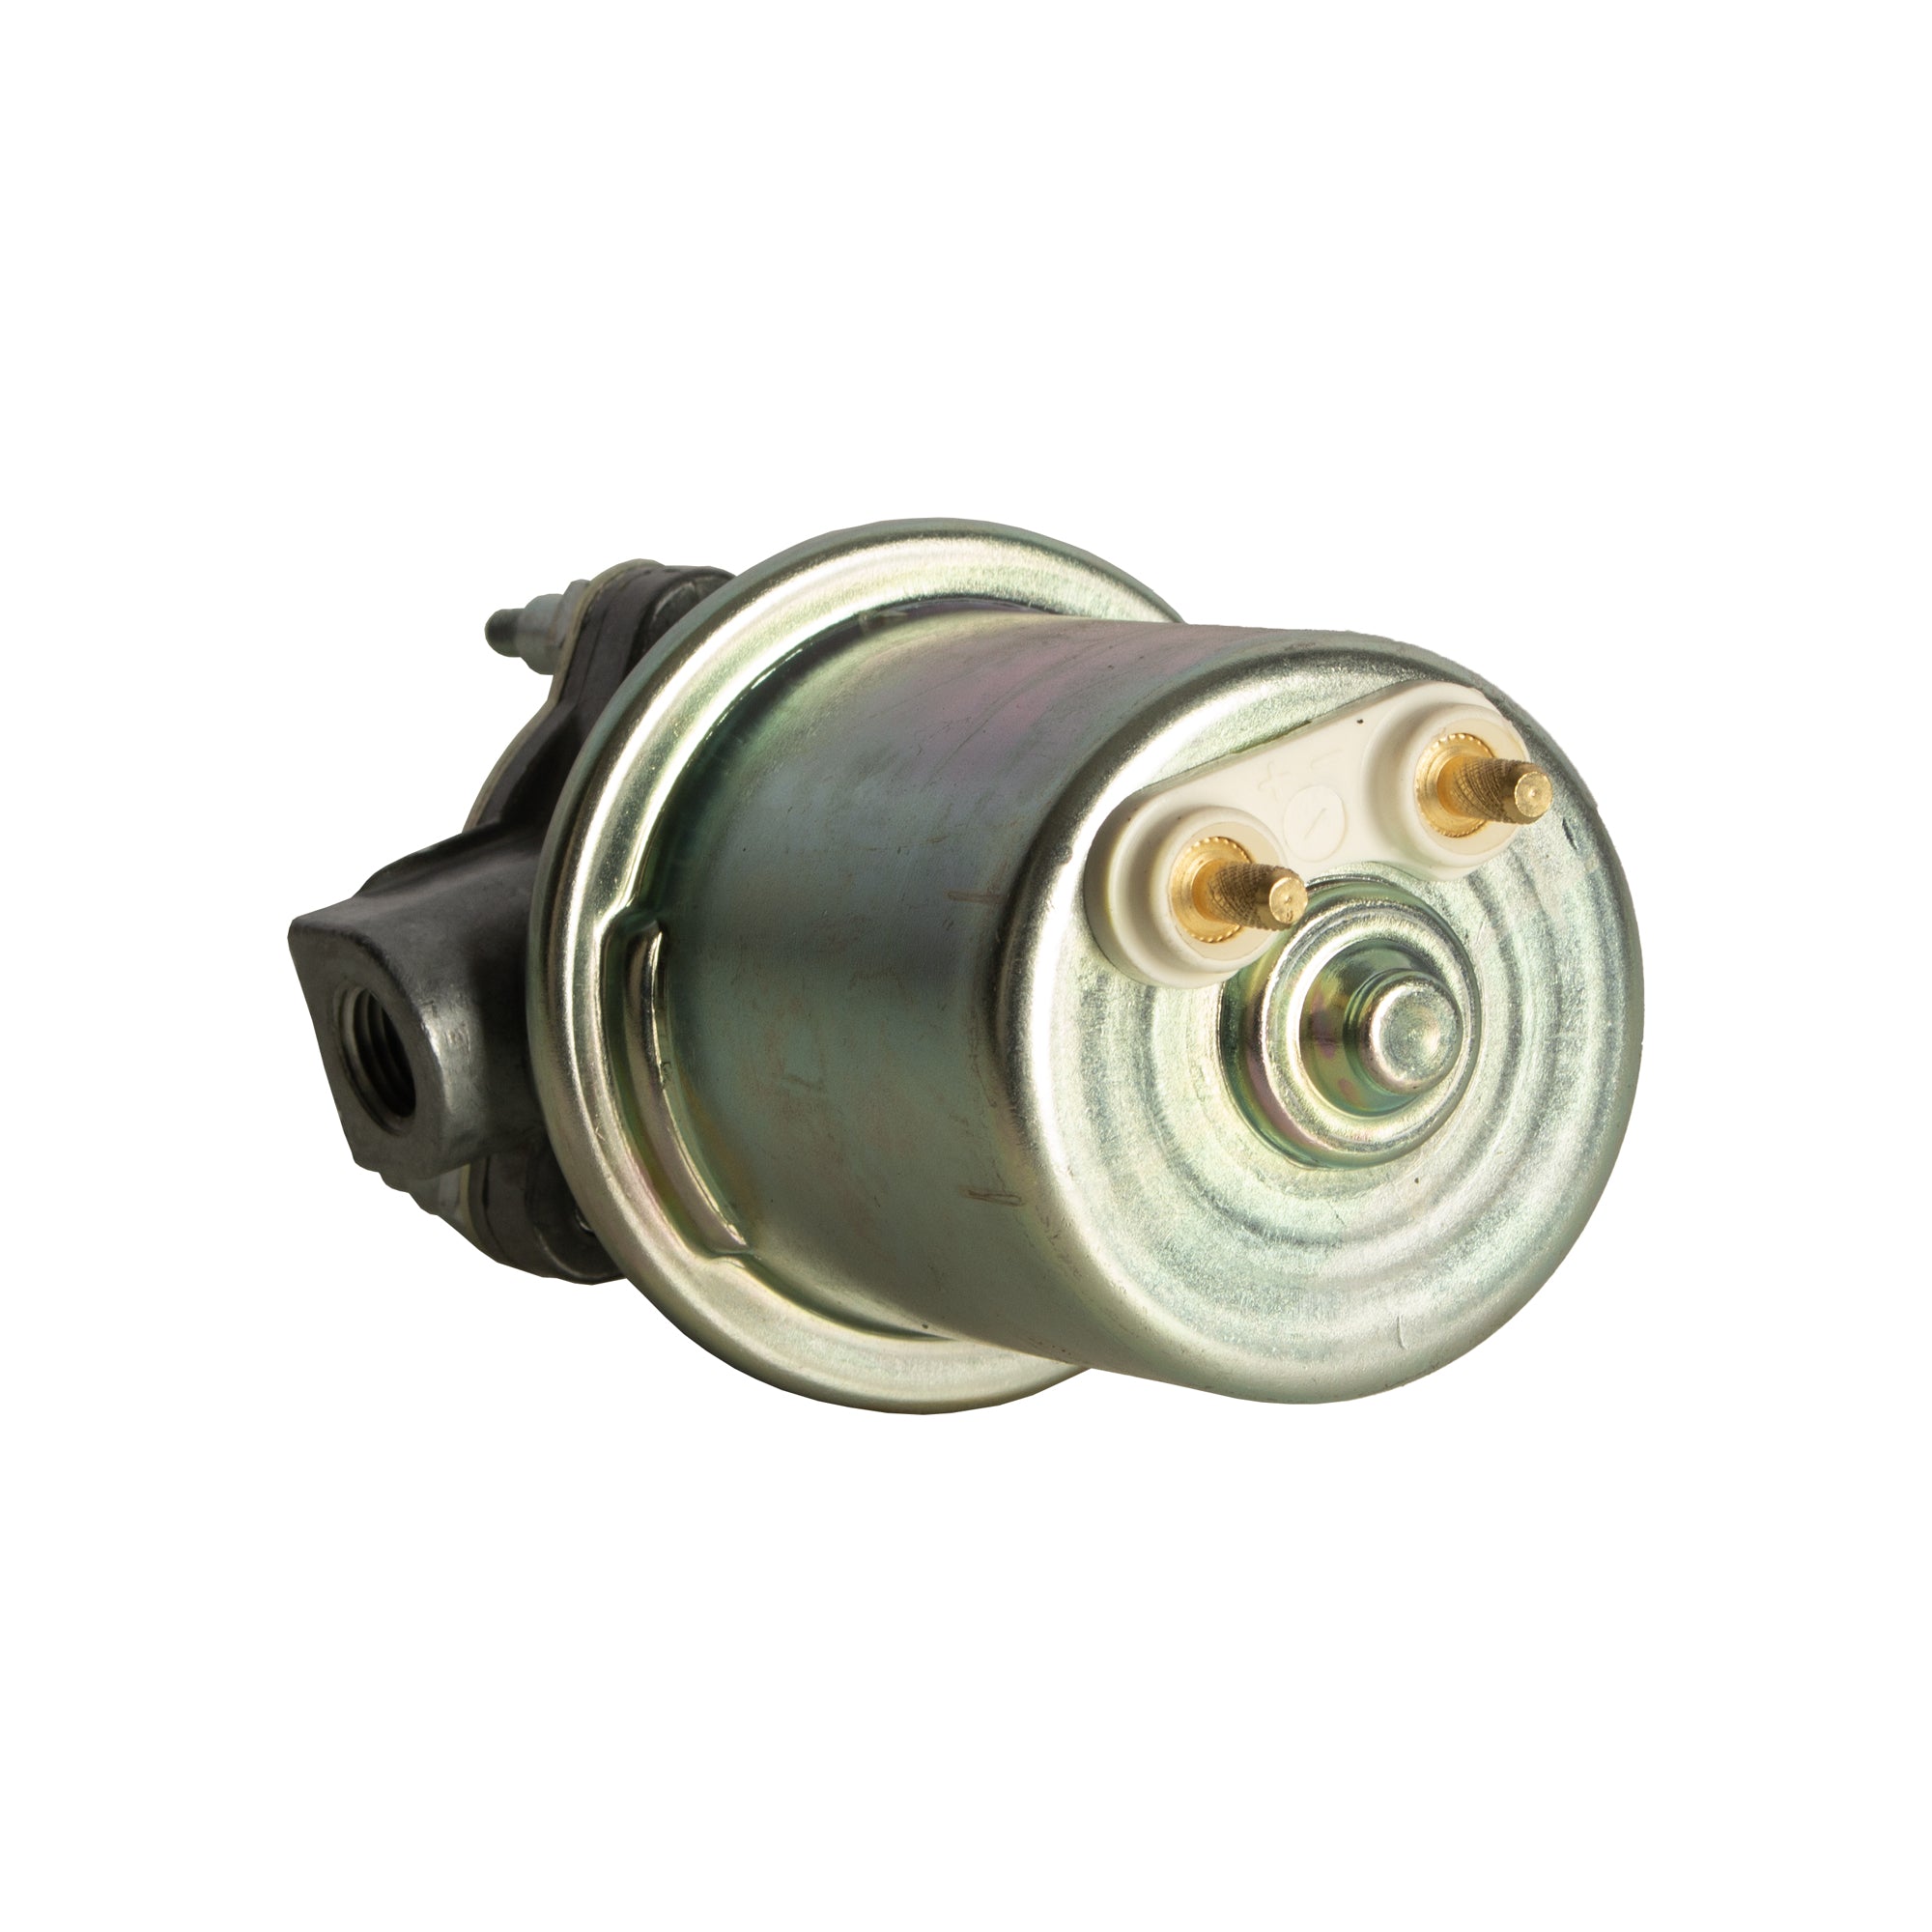 Fuel Pump Replacement for CASE-IH 2344, 2366, 2377 302867A1, 87472310